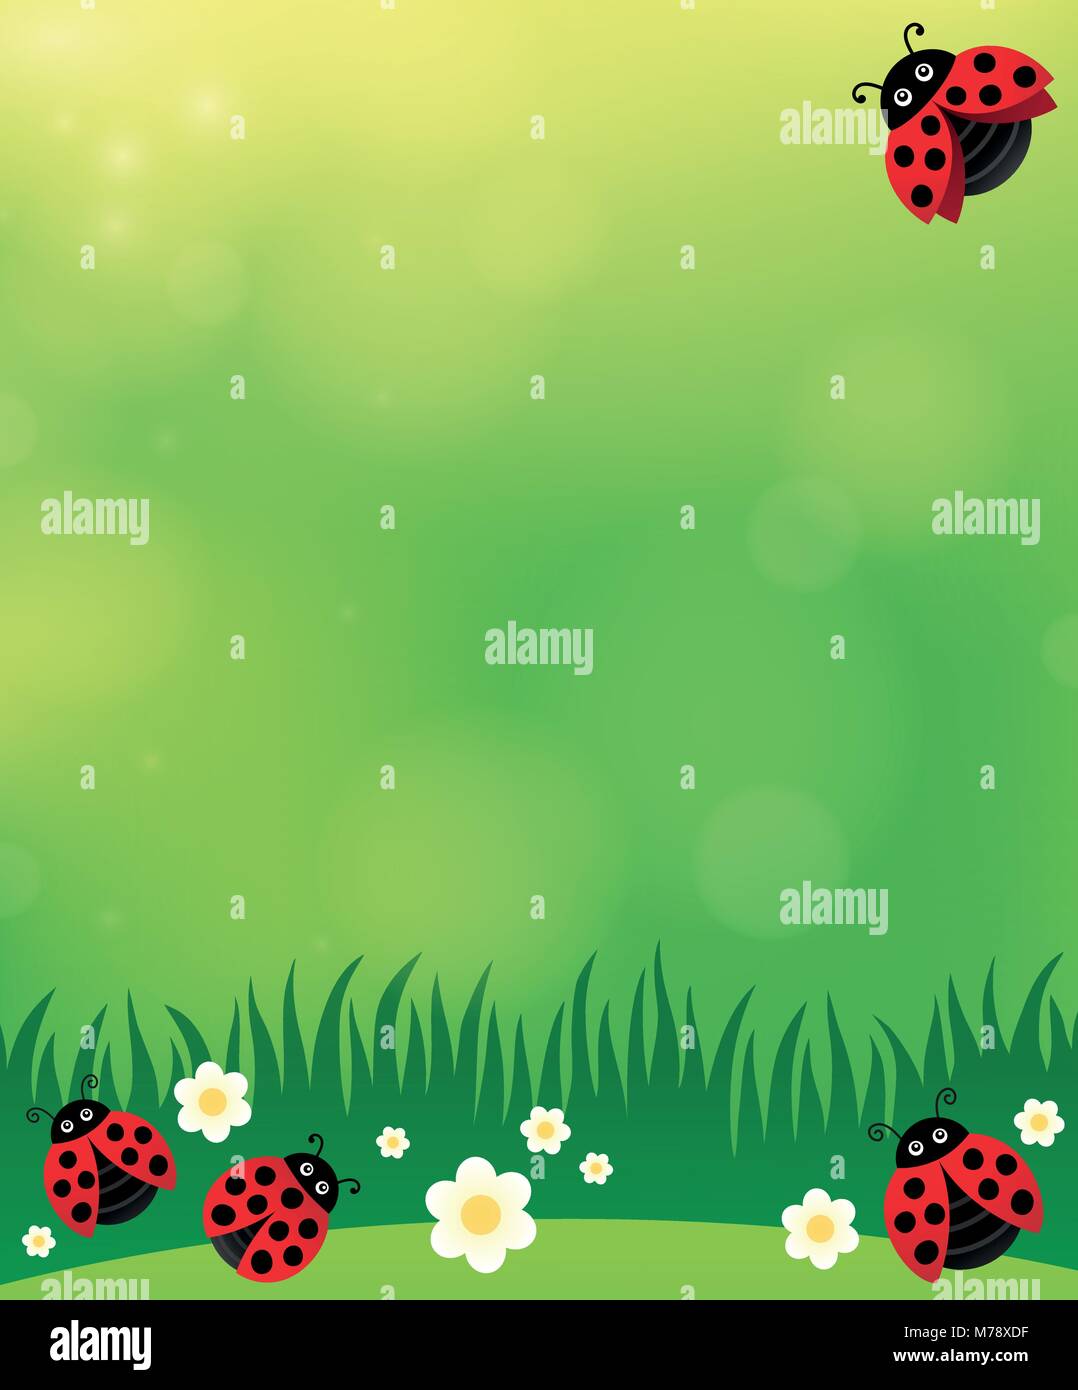 Spring background with ladybugs 2 - eps10 vector illustration. Stock Vector